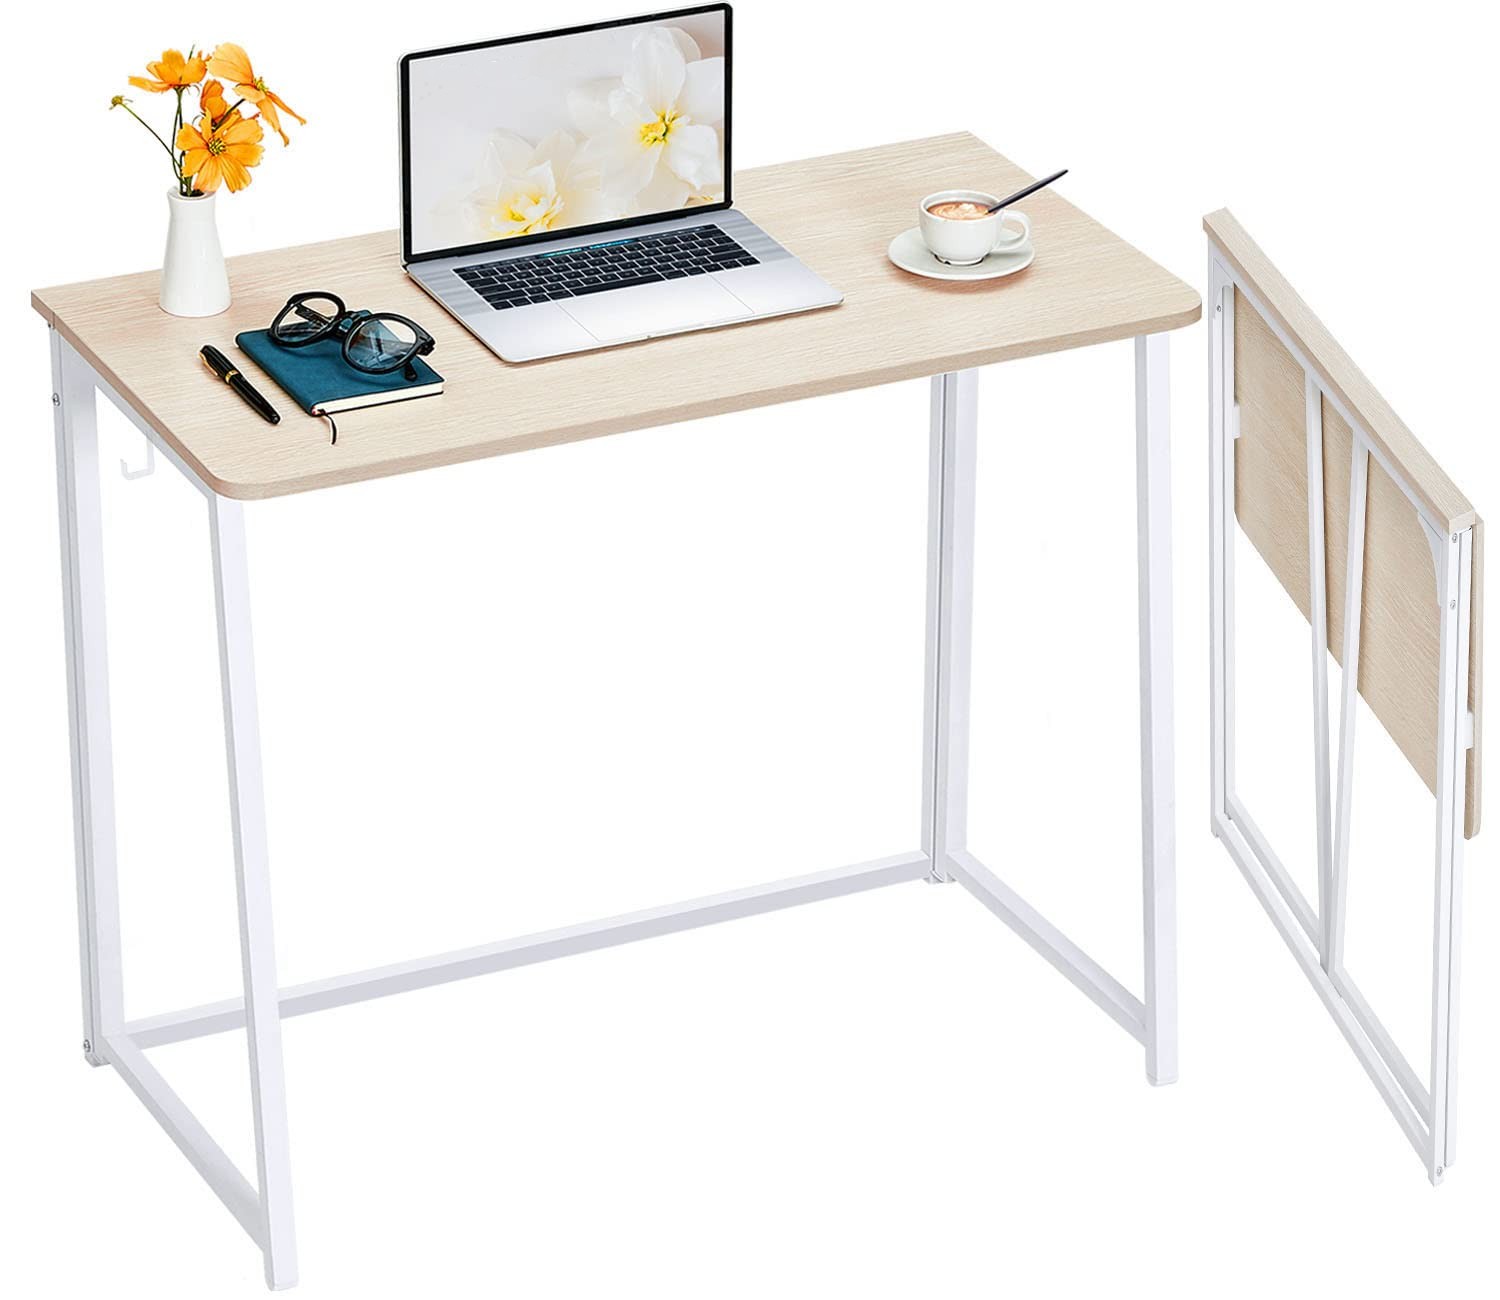 Folding Desk Small Foldable Desk Space Saving Computer Writing Workstation Home Office